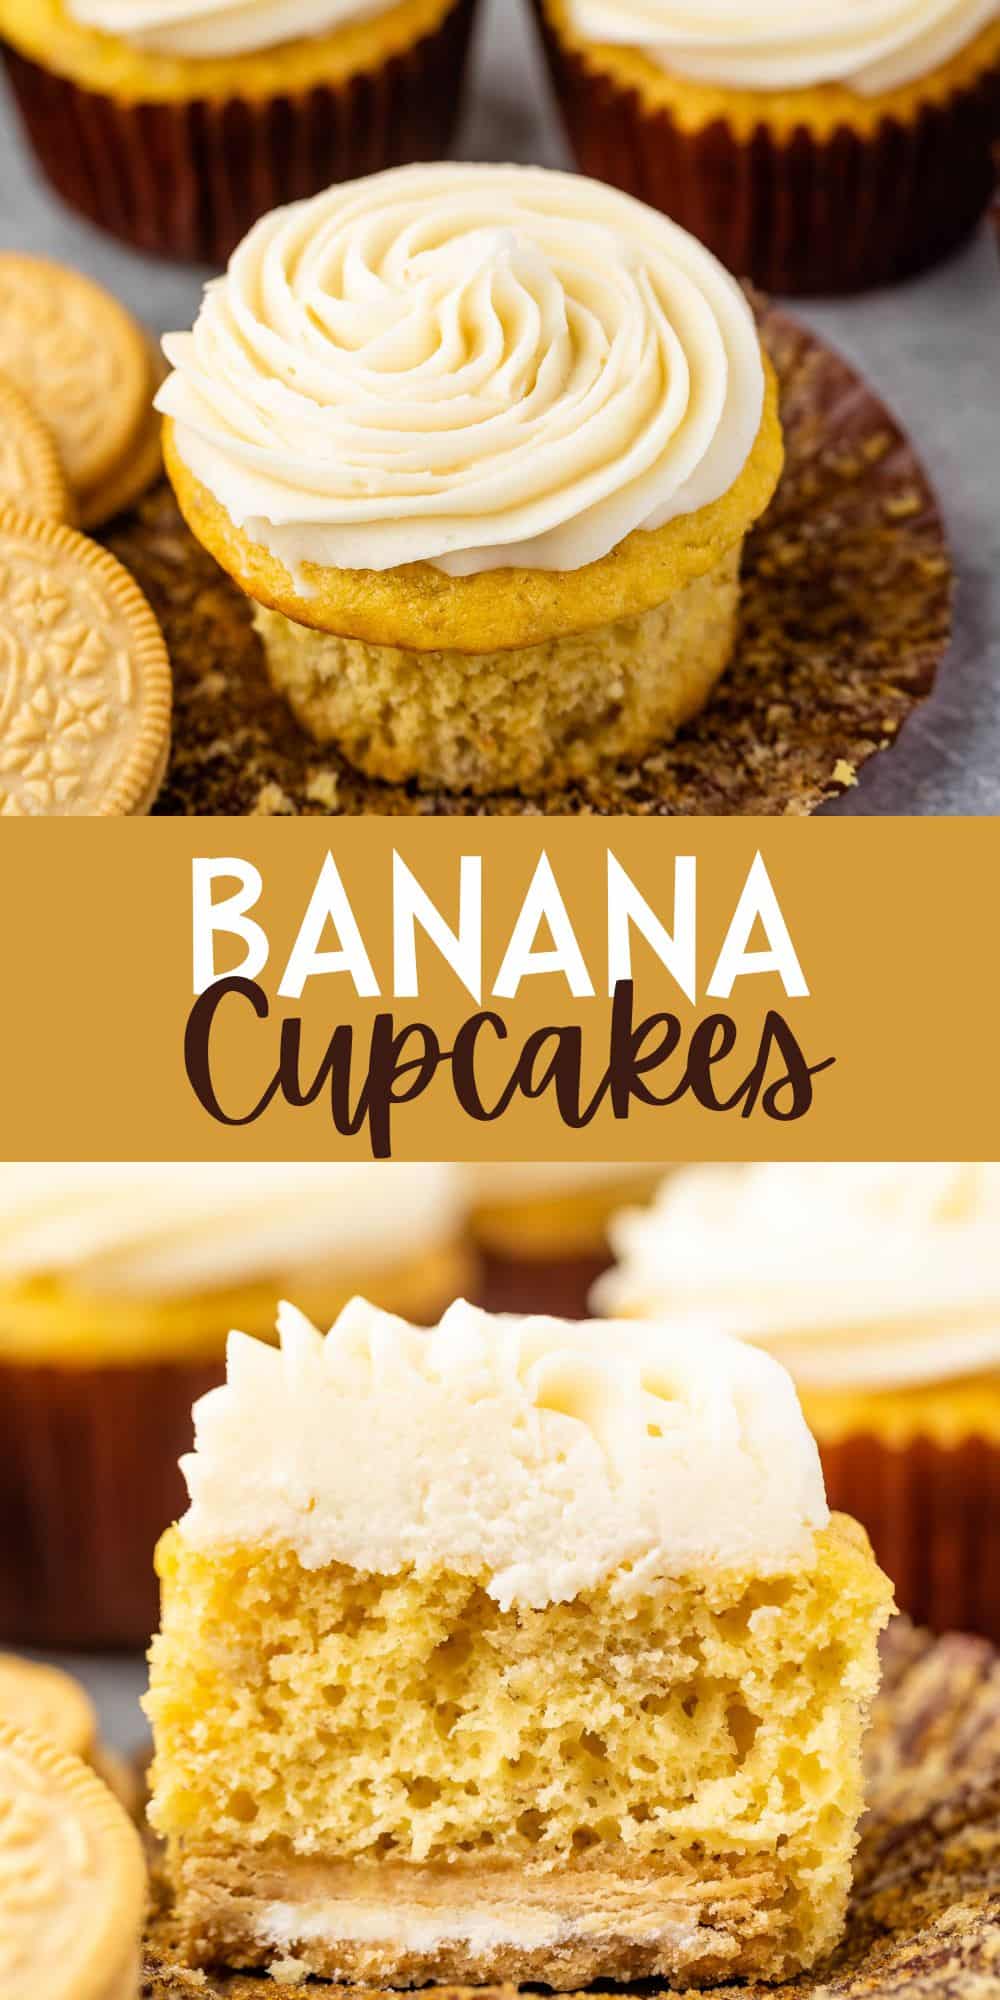 two photos of banana cupcakes next to golden oreos with white frosting with words on the image.